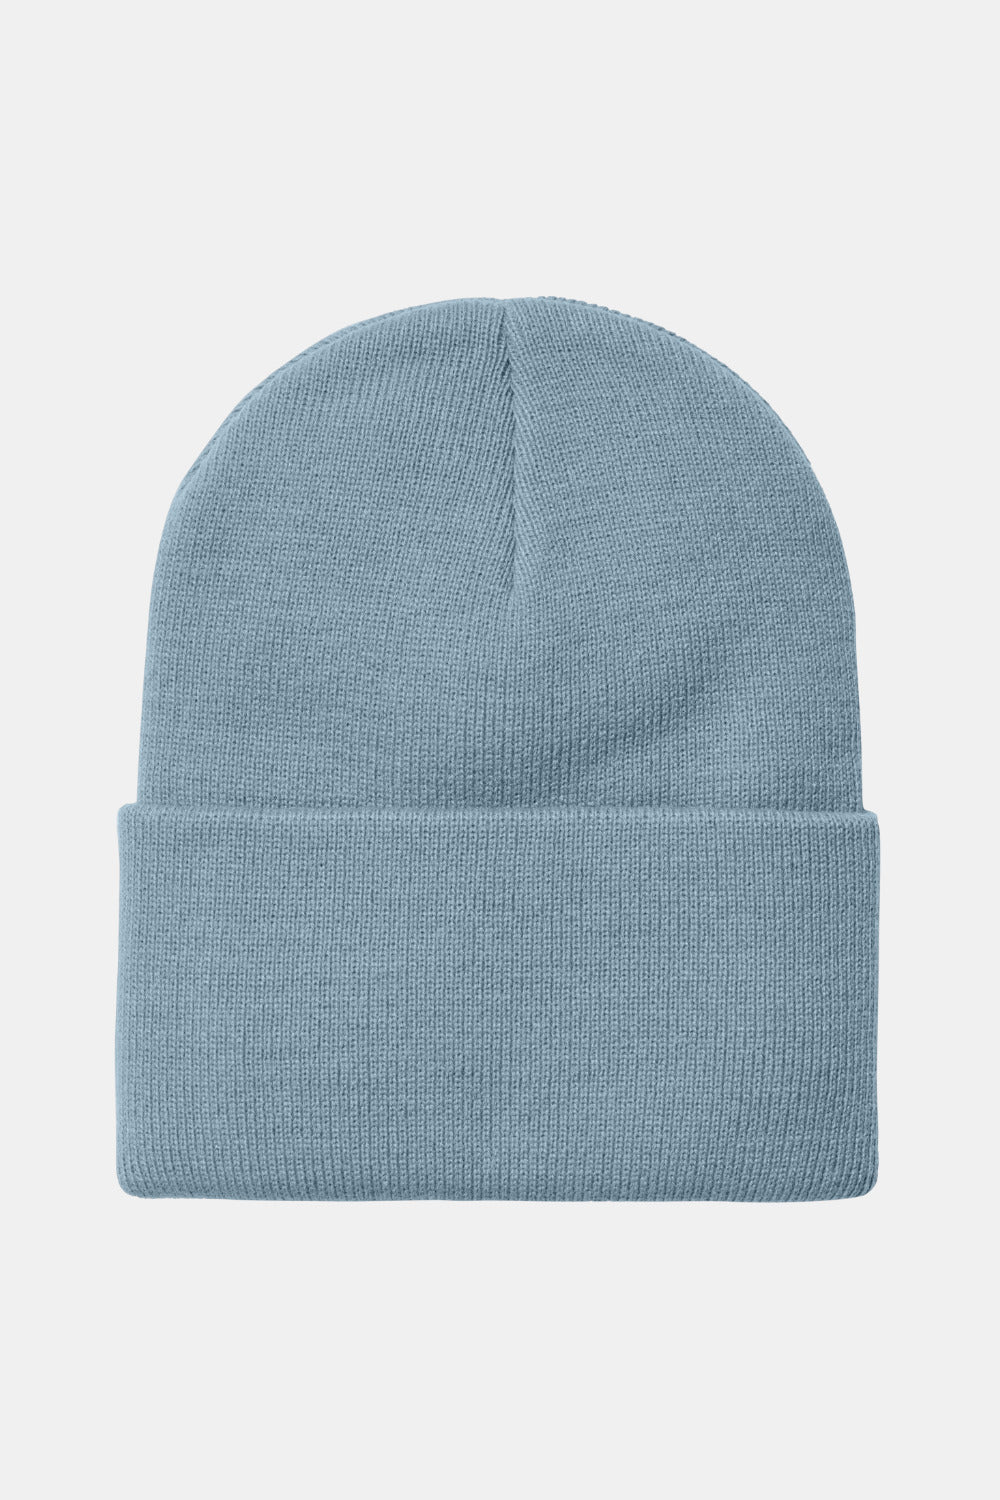 Carhartt WIP Watch Hat (Frosted Blue) | Number Six